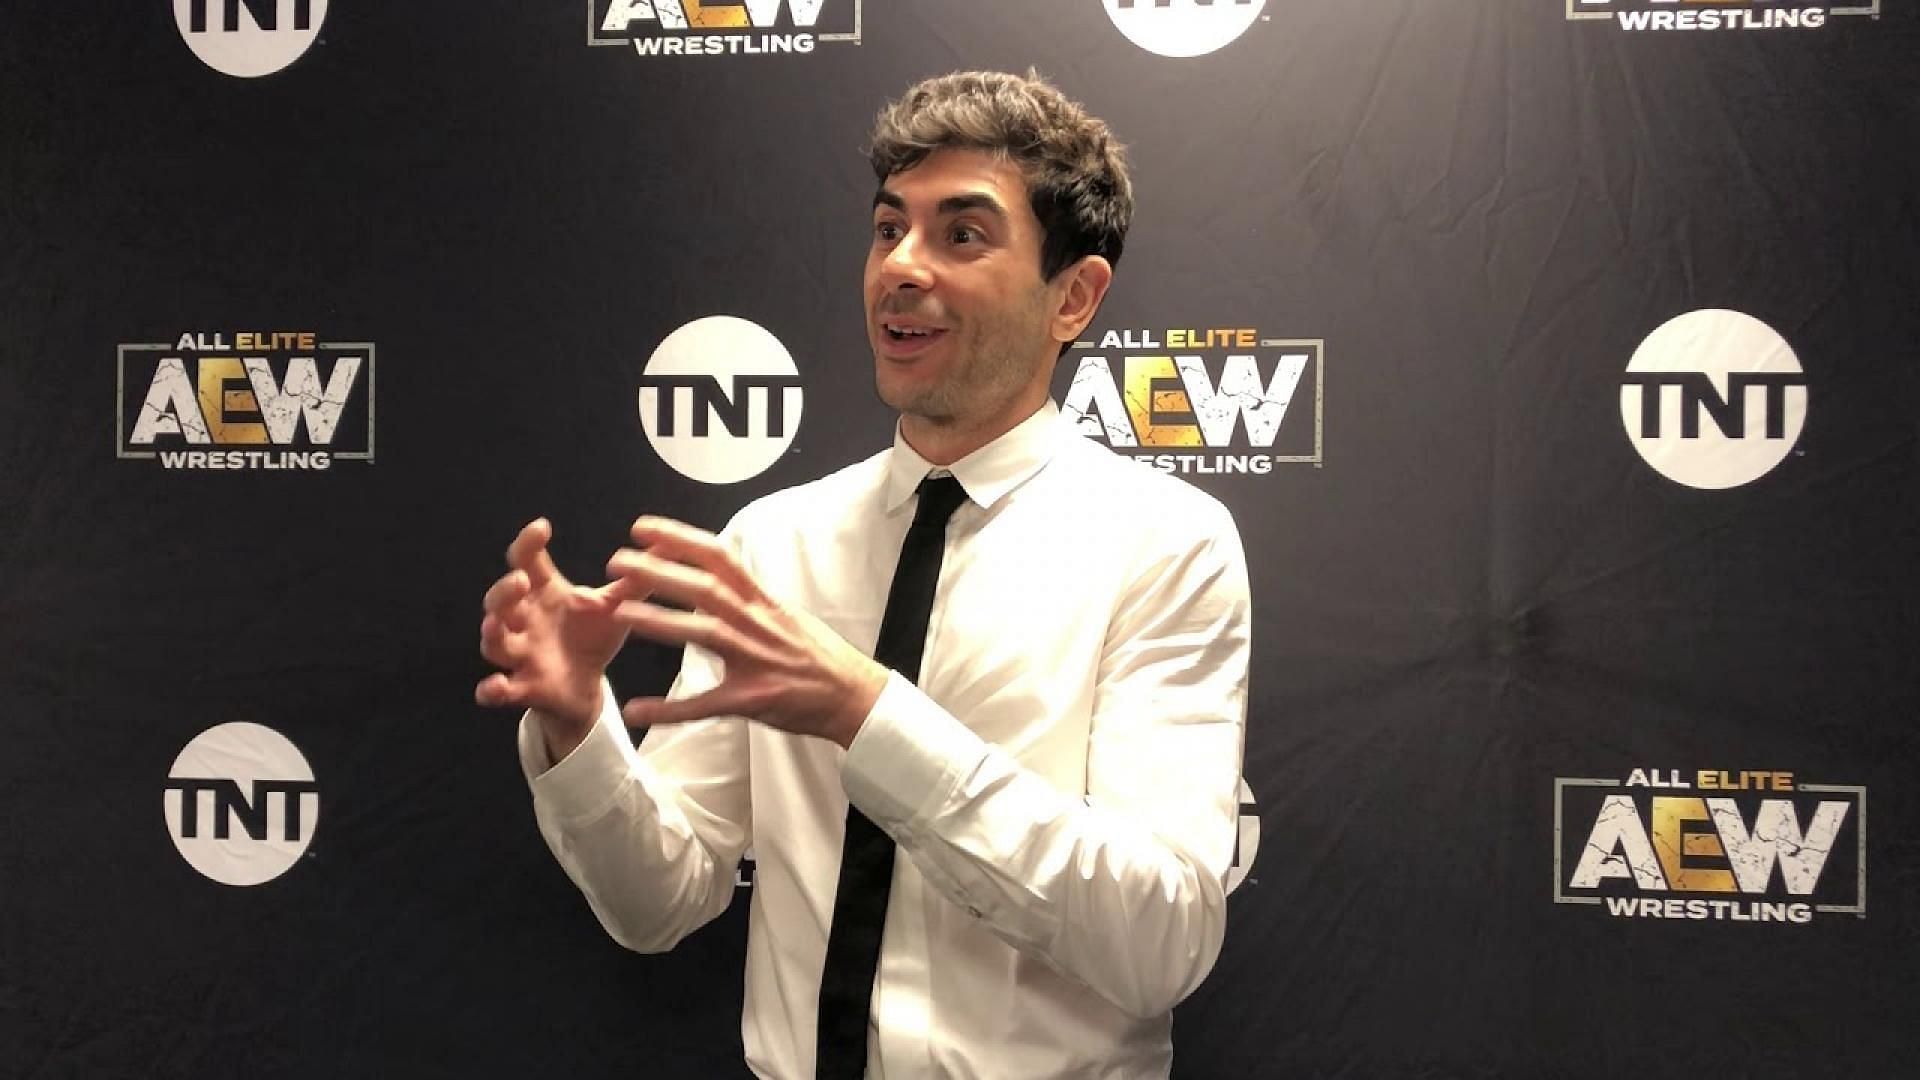 The AEW President recently talked about his decision to purchase ROH.